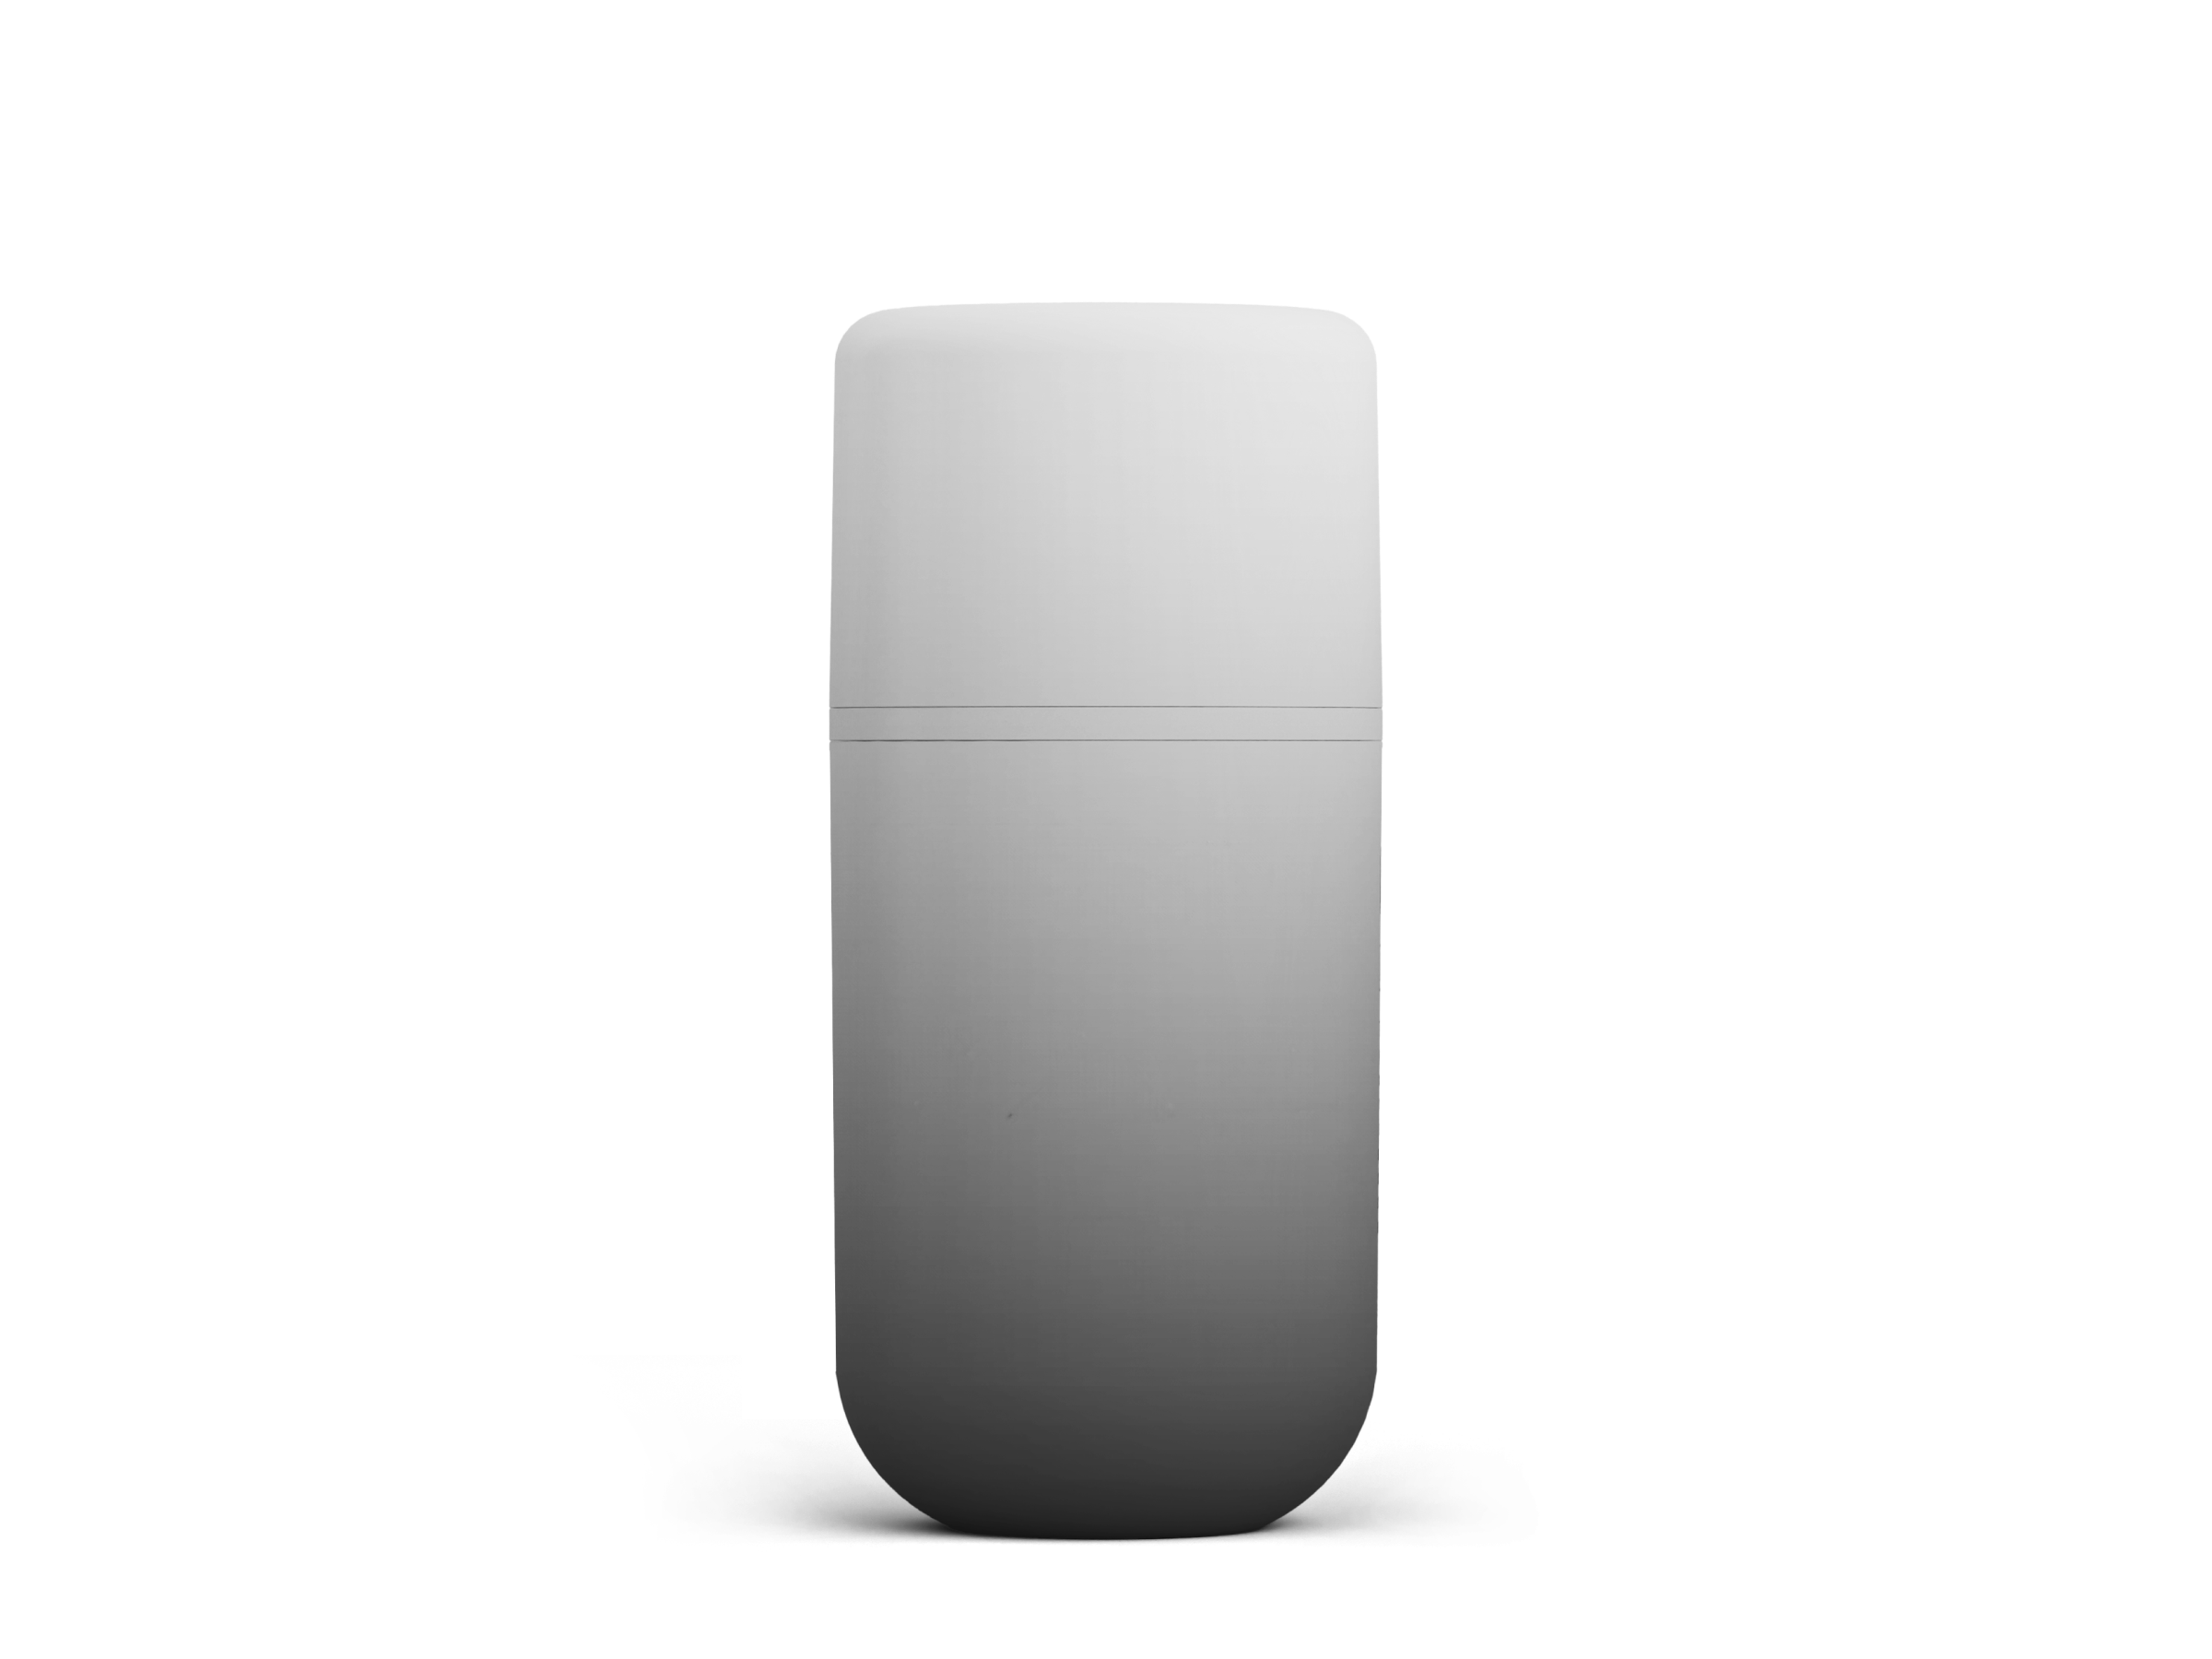 A sleek, minimalistic, cylindrical container with rounded edges, shown against a black background. The container appears to be white or light gray and has a clear dividing line that suggests it can be opened or unscrewed at the midpoint.